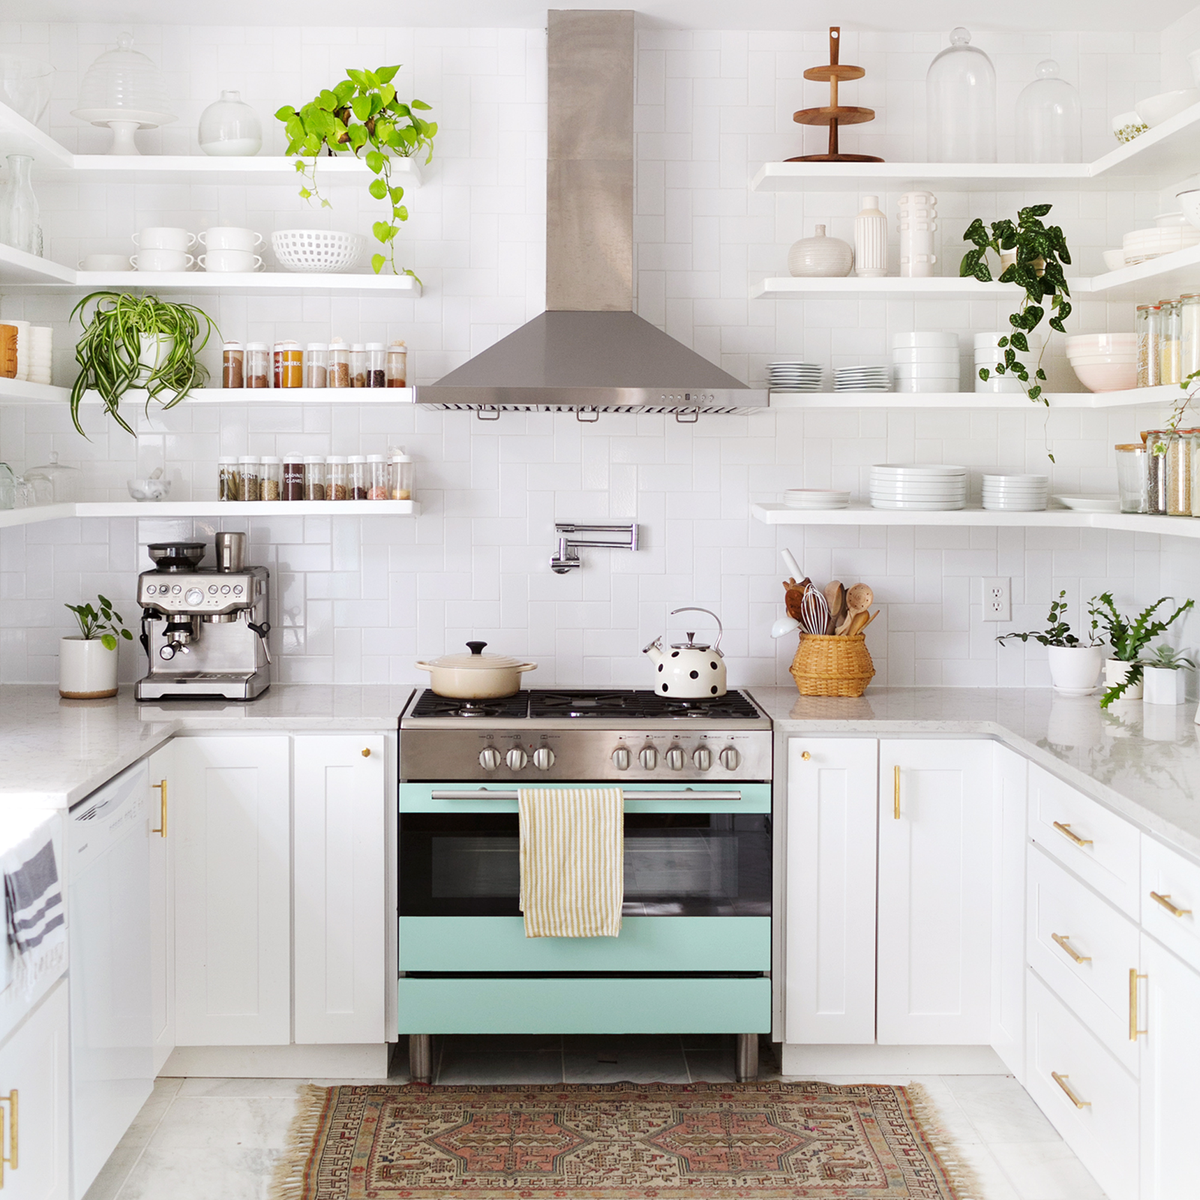 Open Shelving Is The Budget-Friendly Secret To Completing Your Kitchen